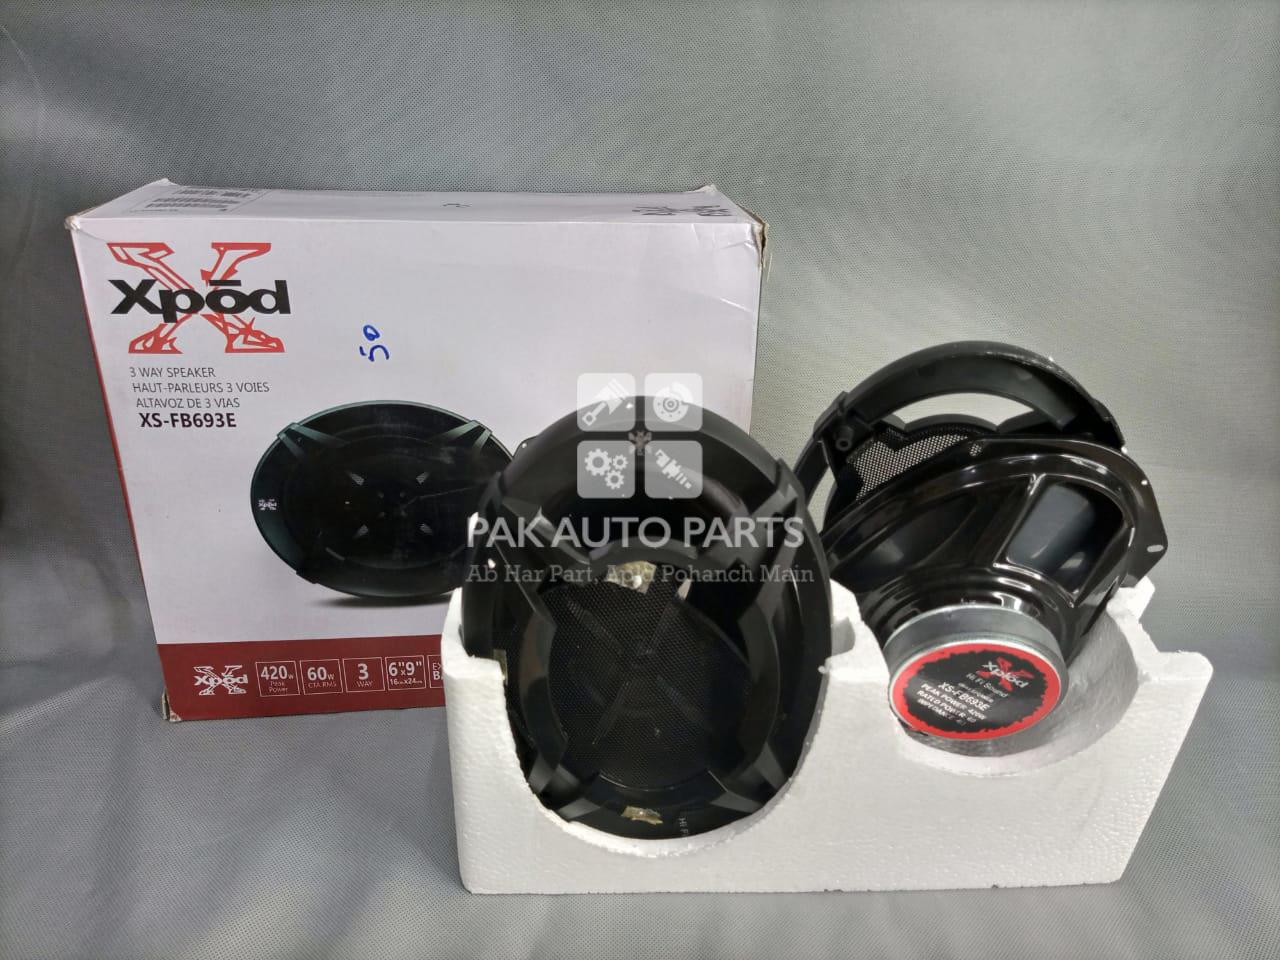 Picture of Xpood 3 Way Speakers 6x9 (420w)